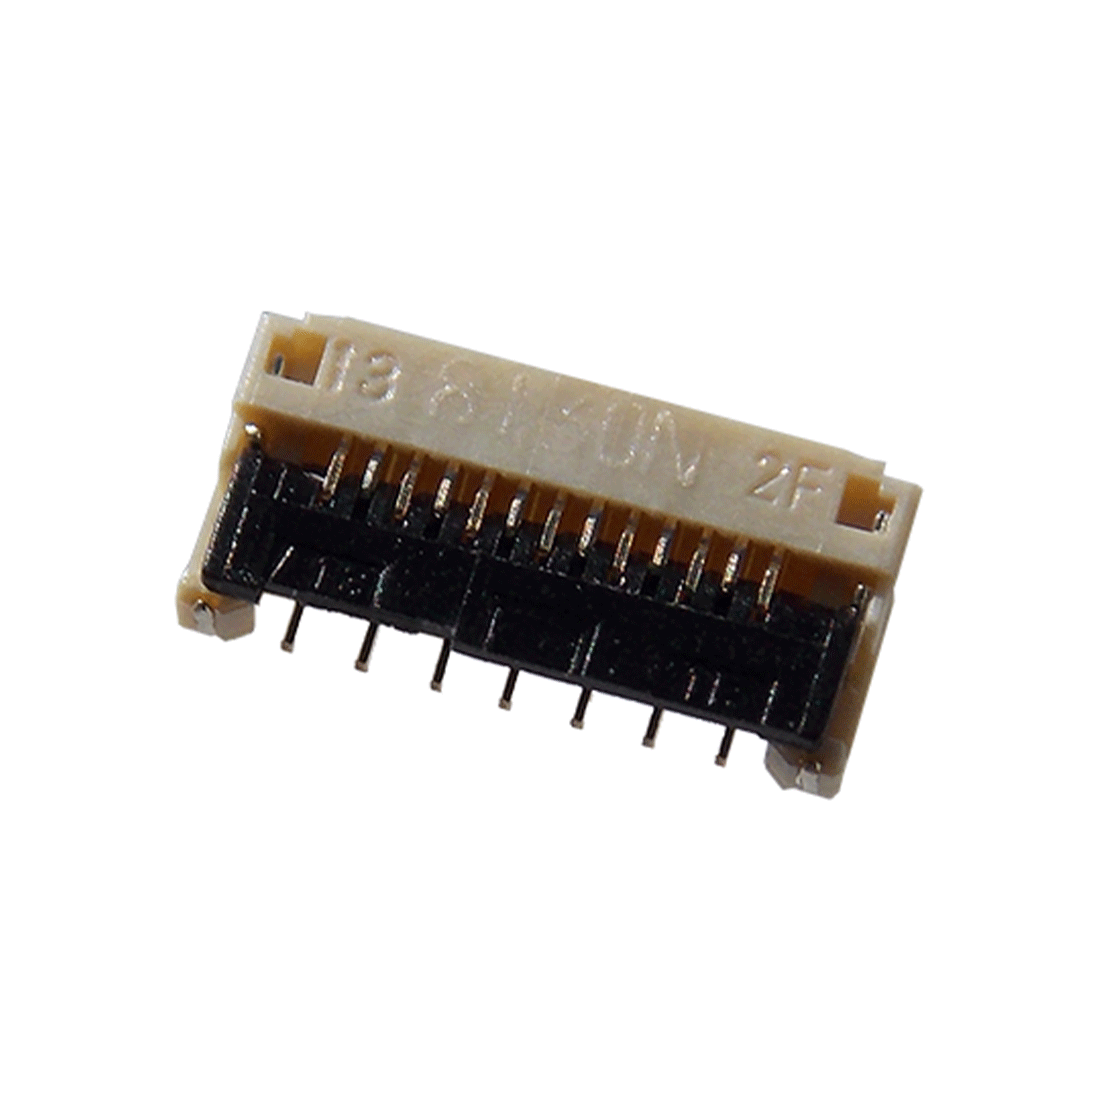 FPC ASSY RA SMT 0.3mm PITCH ZIF TYPE BOTTON CONTACT 11Pin